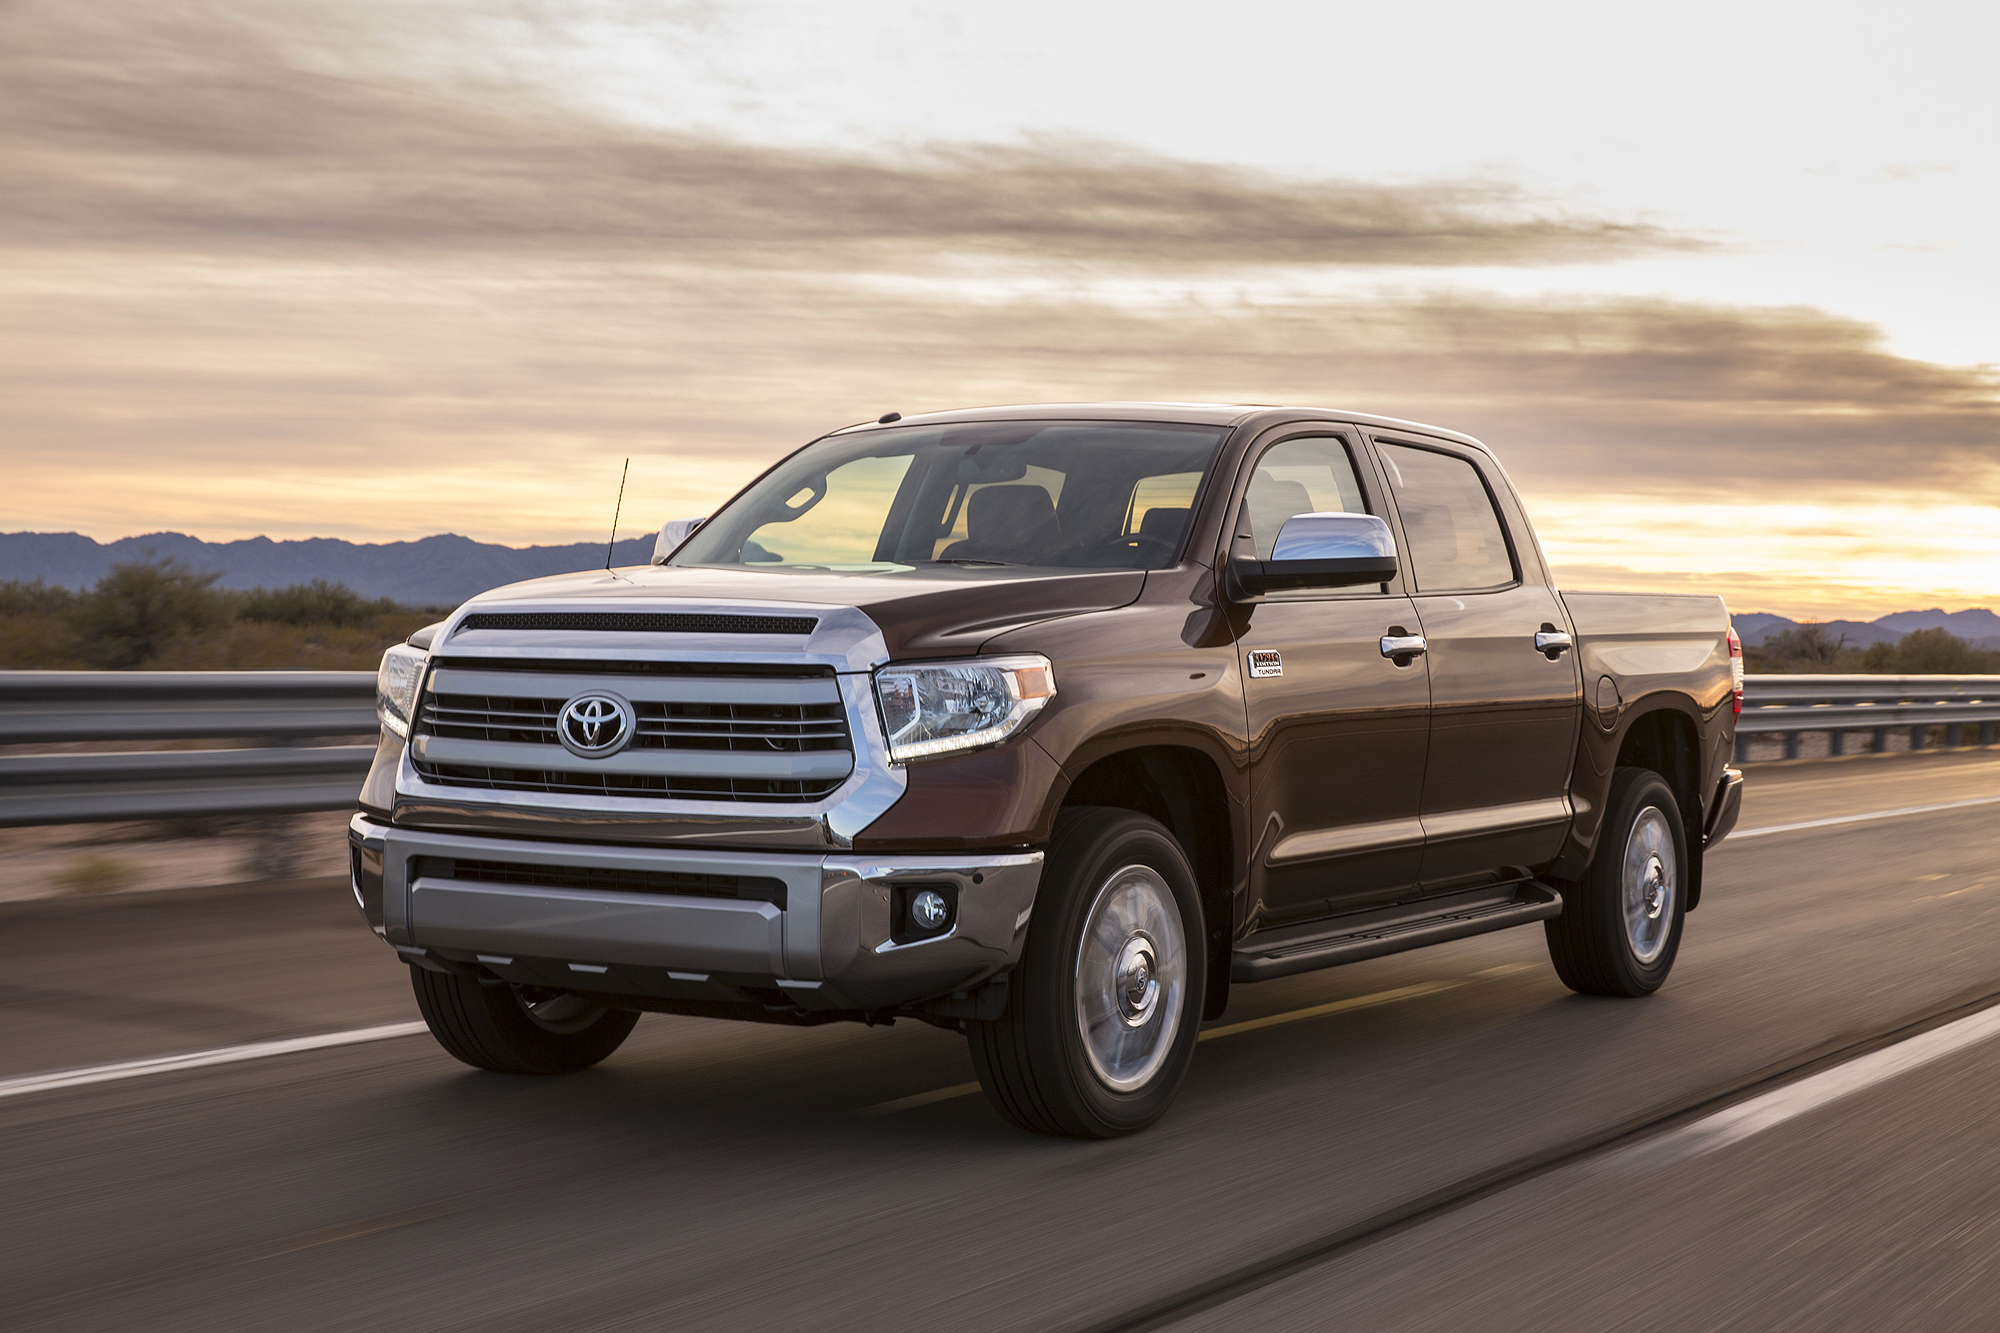 Facelifted Toyota Tundra revealed at Chicago show - Motoring Middle